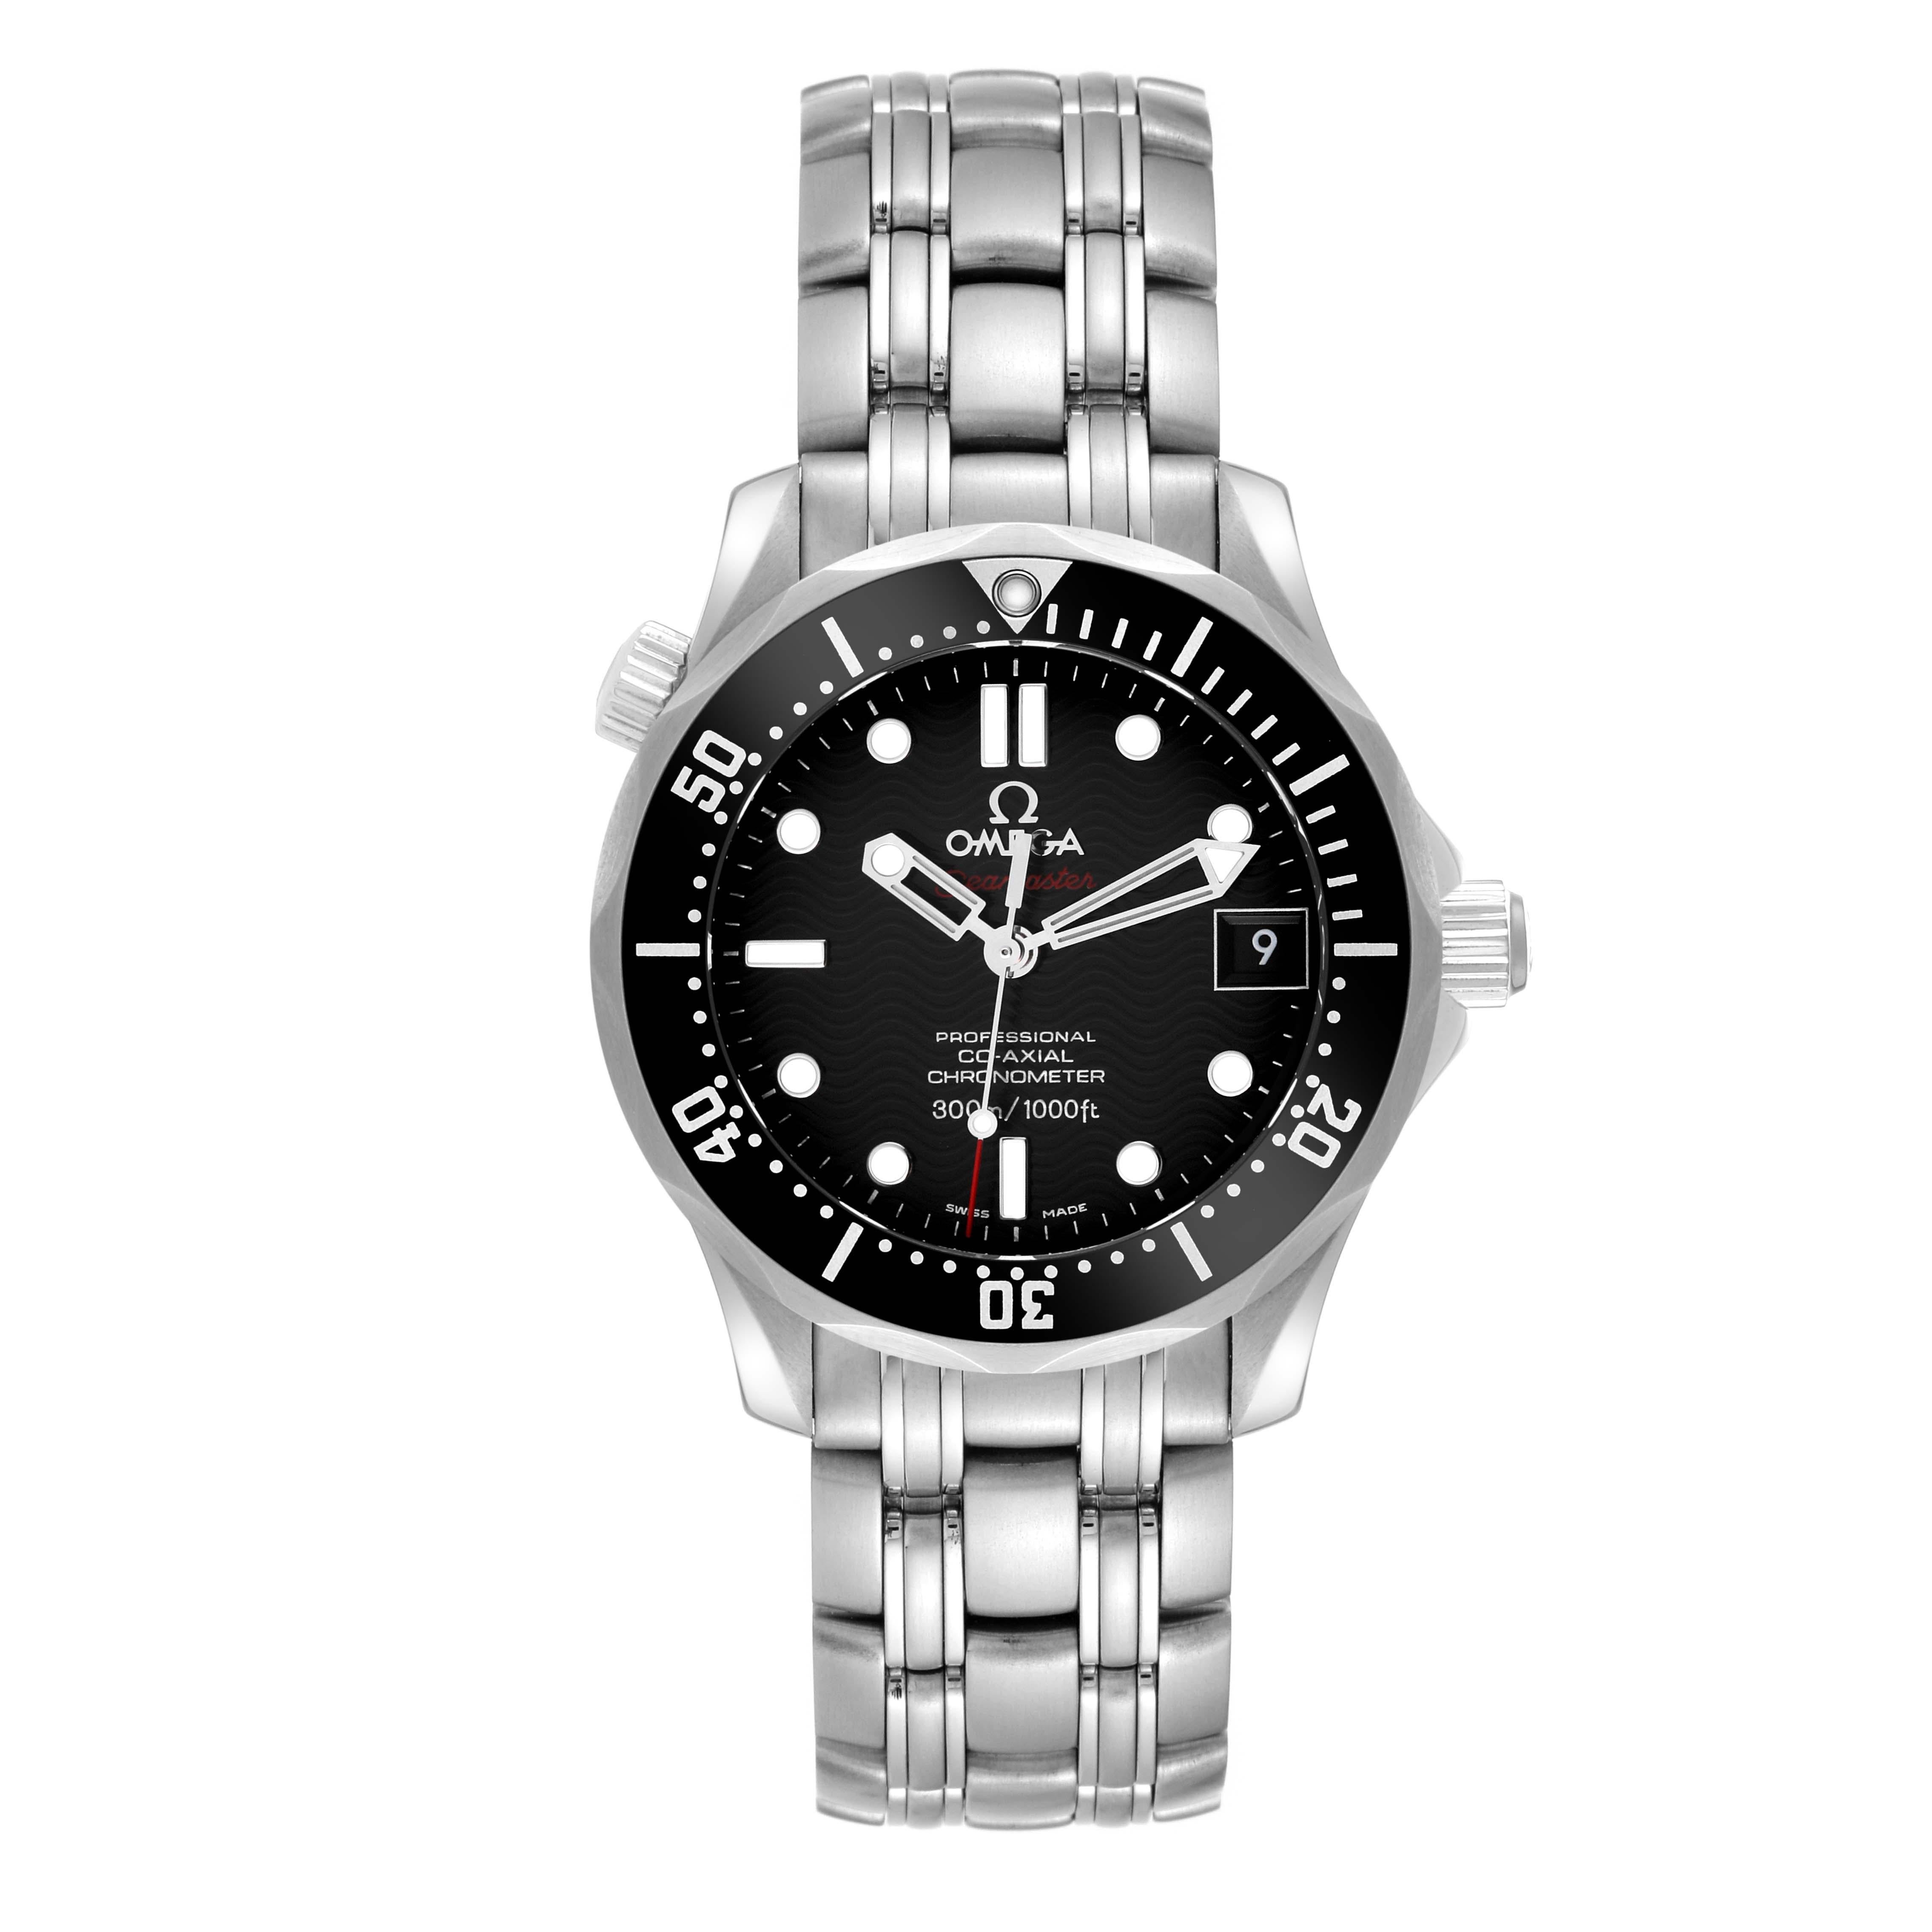 Omega Seamaster 300M Midsize 36 Steel Mens Watch 212.30.36.20.01.001. Automatic self-winding movement. Stainless steel round case 36.25 mm in diameter. Black unidirectional rotating bezel. Scratch resistant sapphire crystal. Black wave decor dial